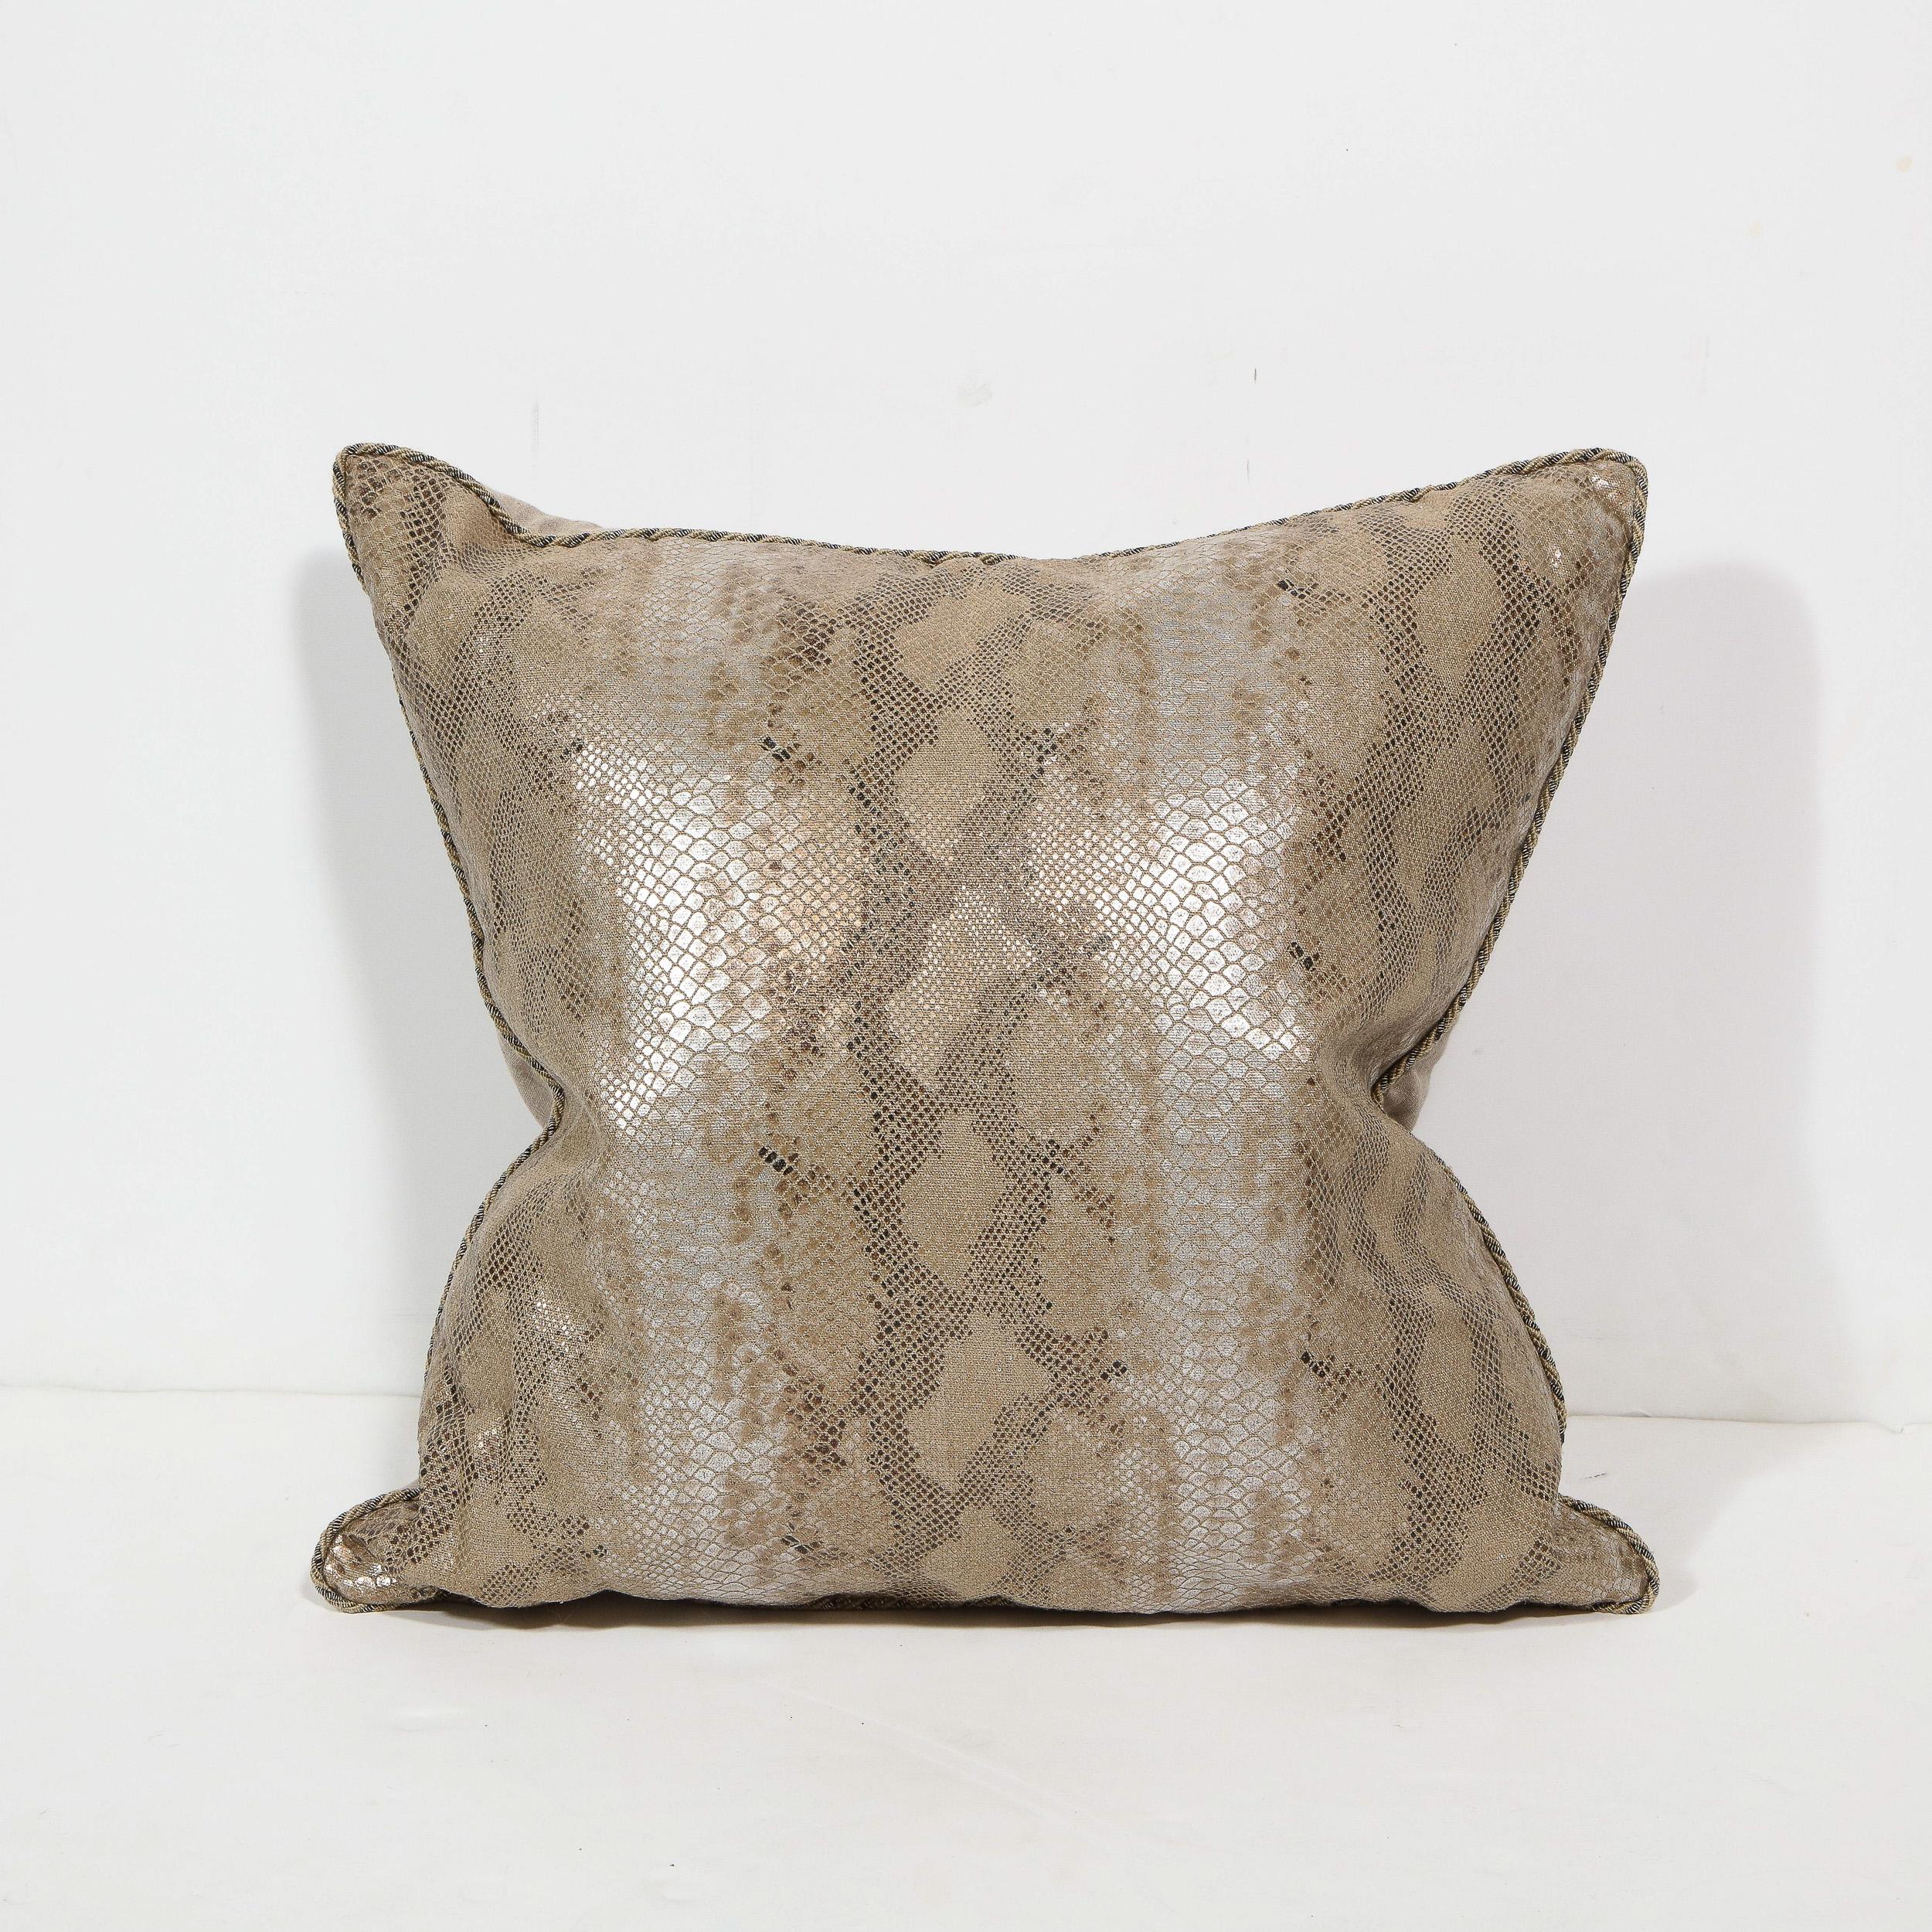 Handcrafted in the United States by Elizabeth Dow home, this bold and sophisticated modernist pillow offers a stylized python print pattern rendered in metallic hues of bronze and silver with undertones of java against a tan background. The pillow